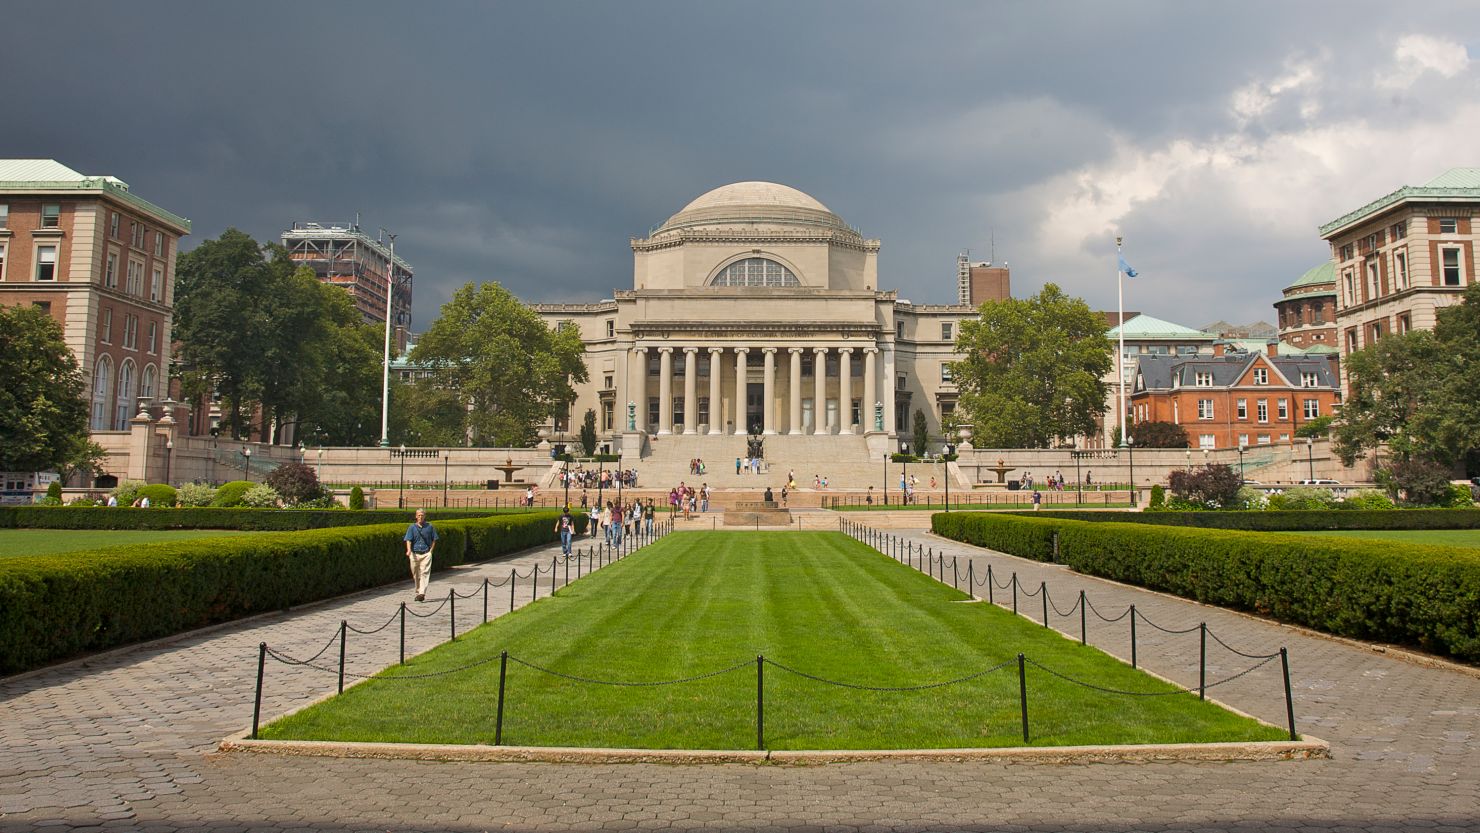 Columbia University, main quad with Low Memorial Library, Upper West Side, New York, NY, U.S.A.